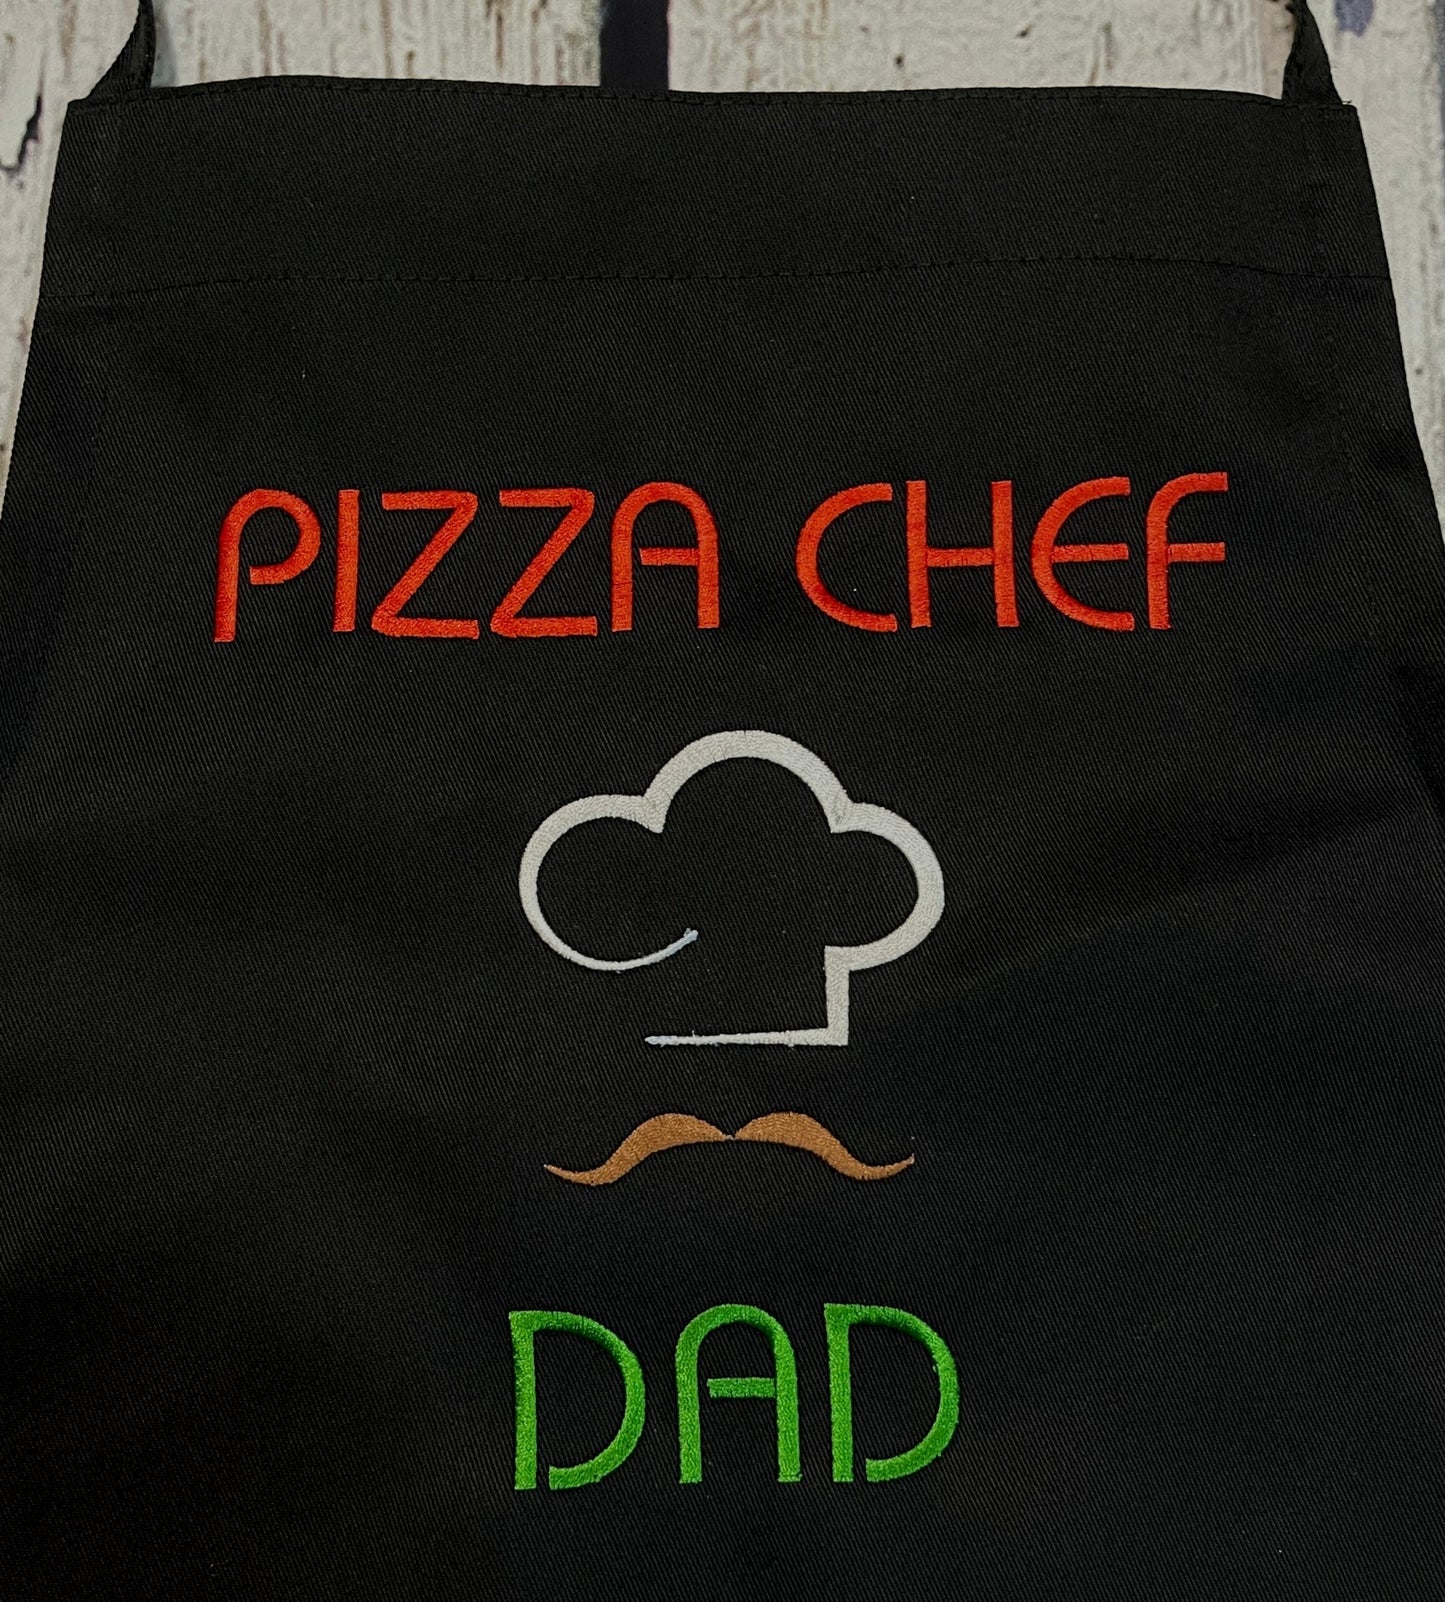 Adult or Teen Embroidered Personalized Pizza Chef Apron for The Pizza Chef in the Family